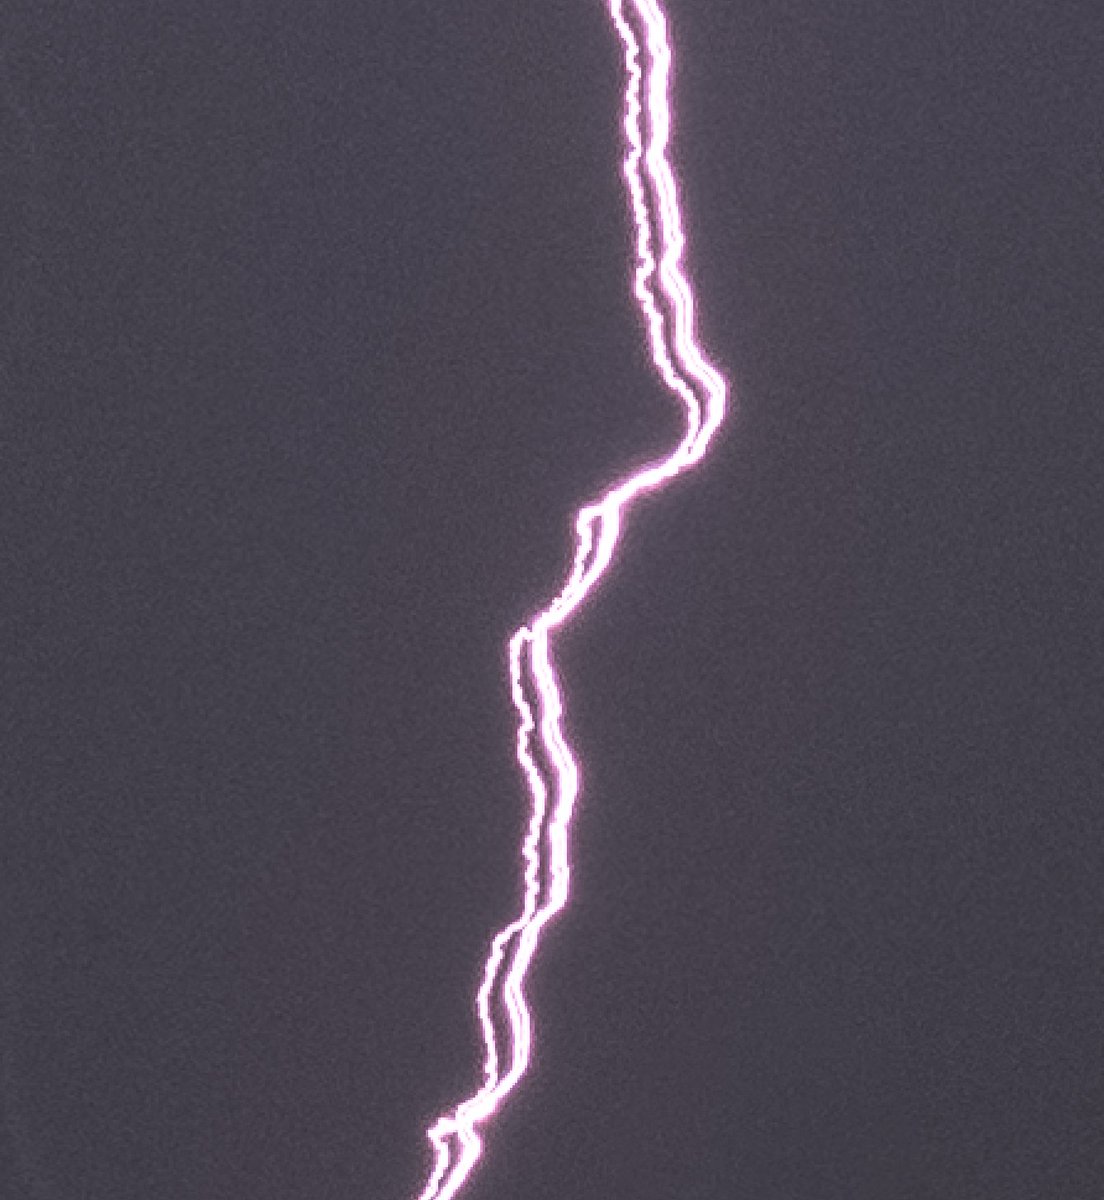 The bolts are dropping over Chicago! This multi-stroke flash produced 'ribbon lightning'. #ILwx